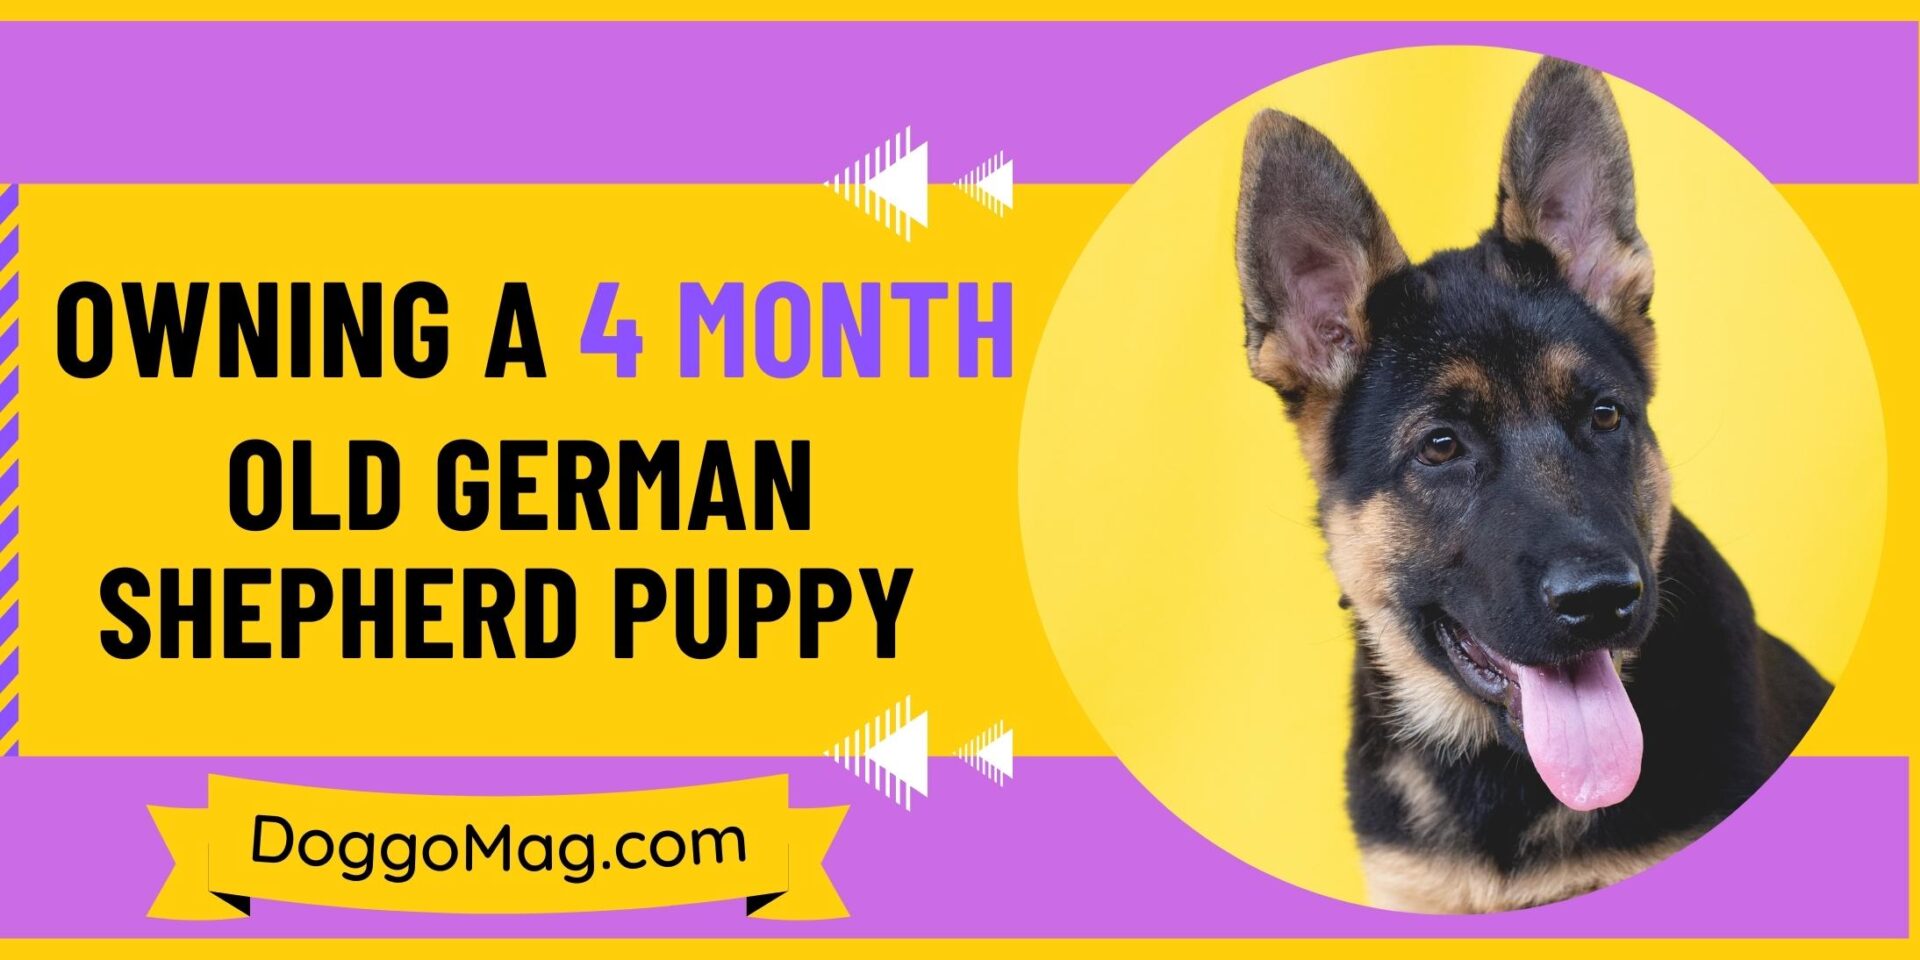 Owning A 4 Month Old German Shepherd Puppy Dog